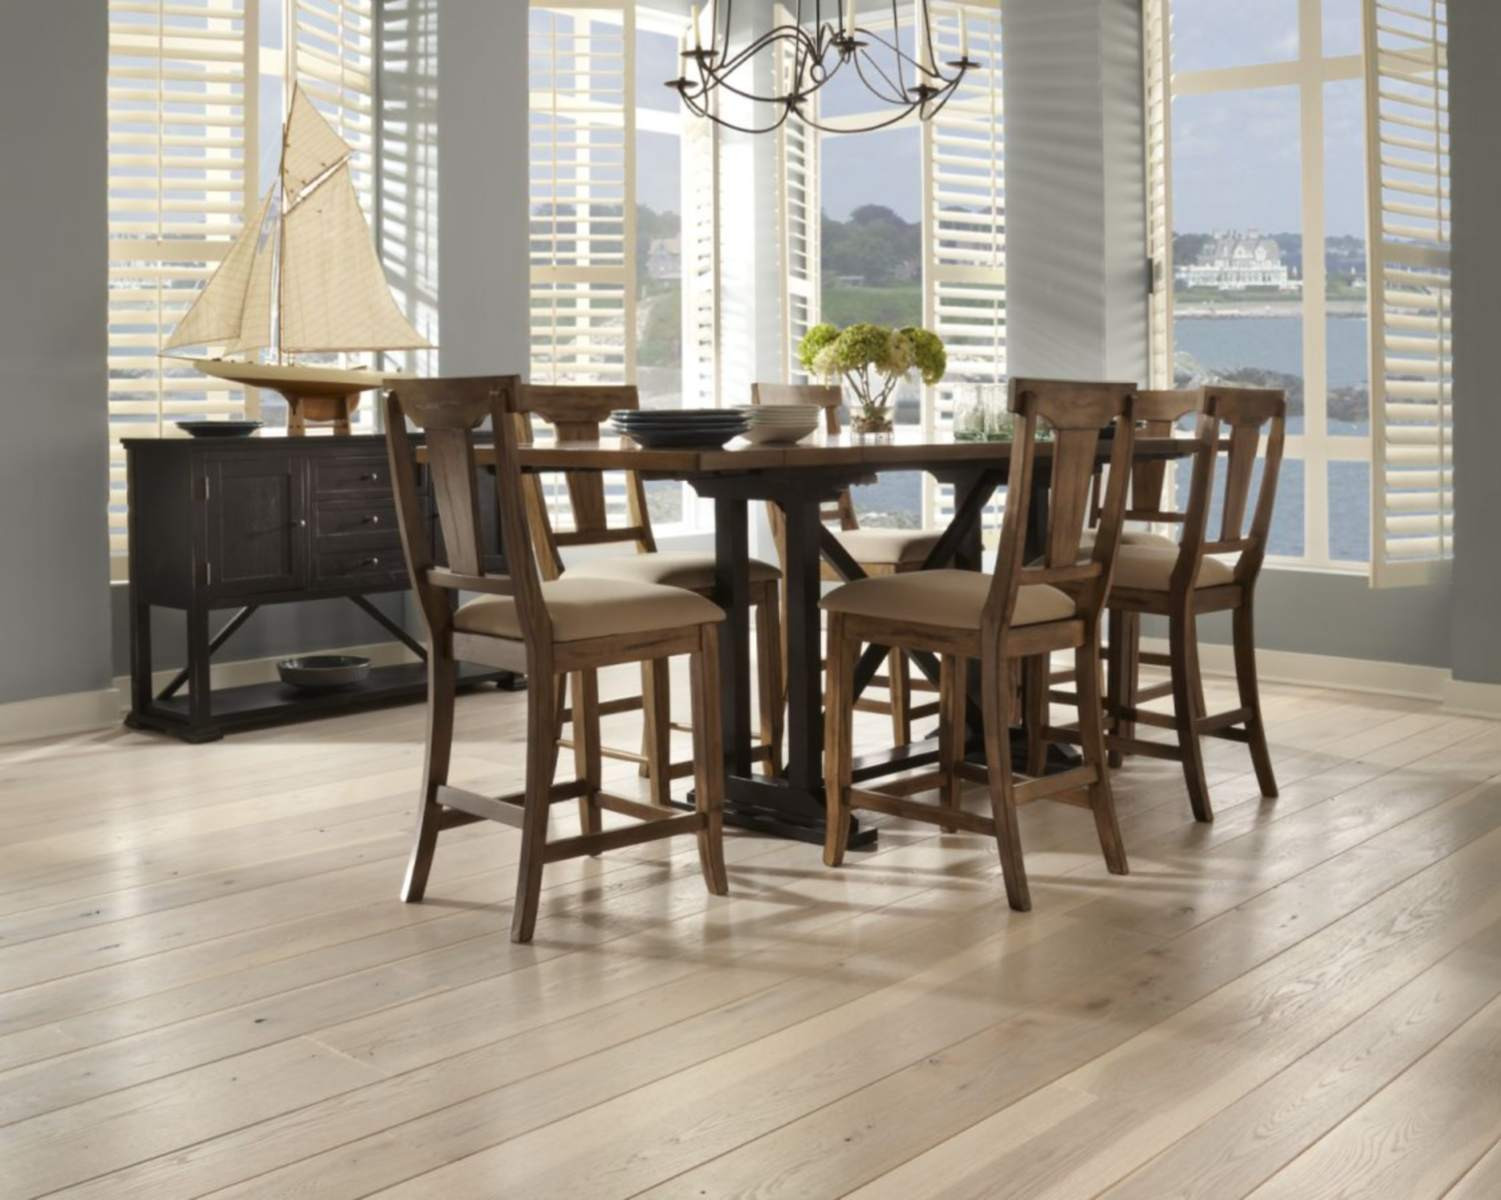 25 attractive top Hardwood Floor Colors 2017 2022 free download top hardwood floor colors 2017 of top 5 brands for solid hardwood flooring for a dining room with carlisle hickorys wide plank flooring